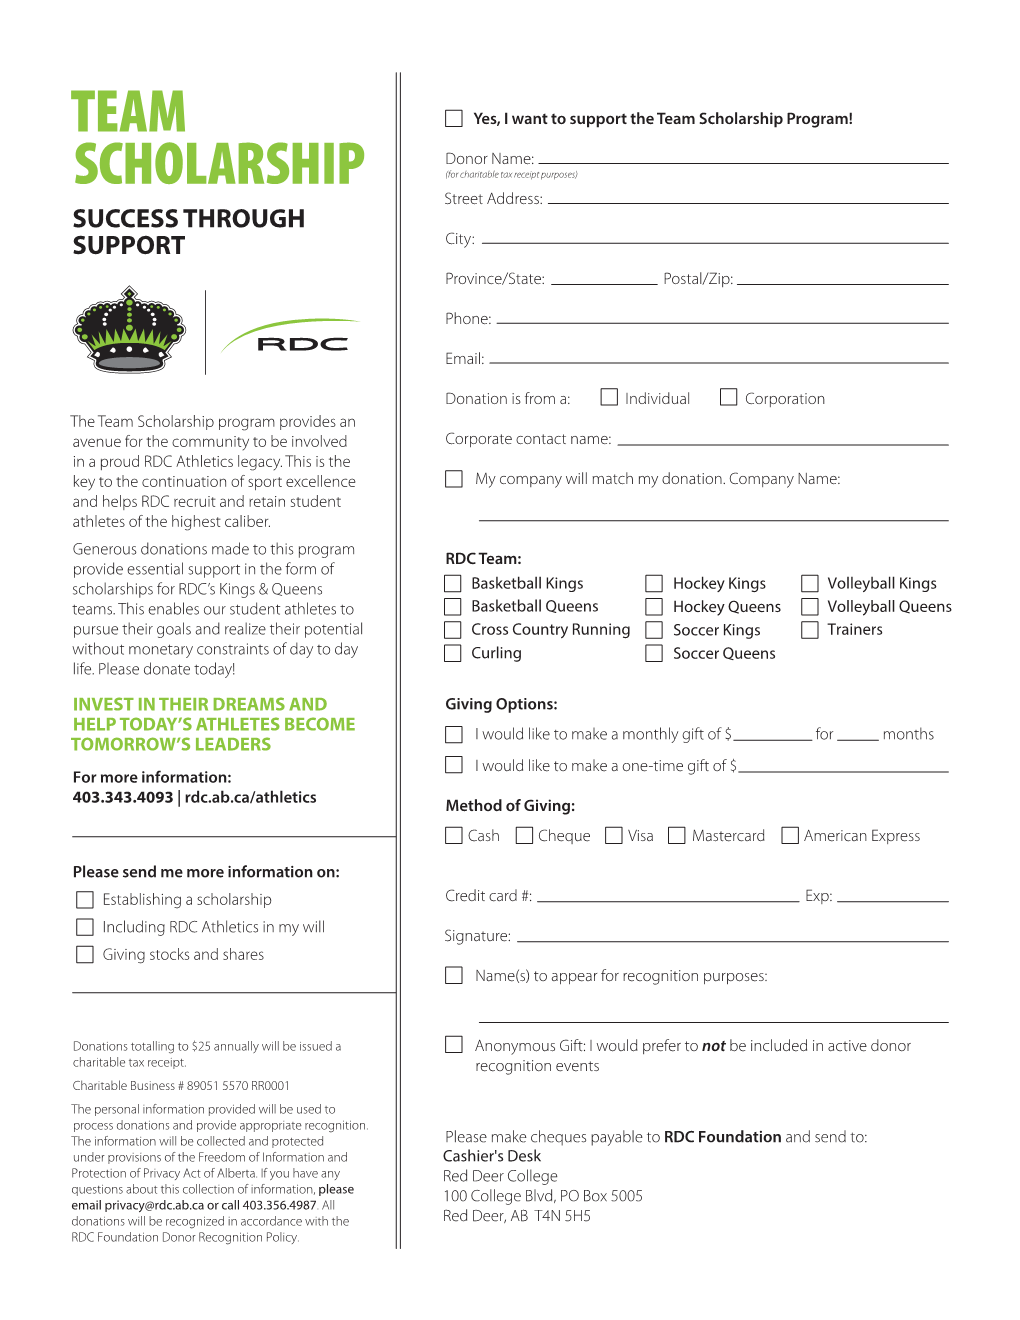 Team Scholarship Program! Donor Name: SCHOLARSHIP (For Charitable Tax Receipt Purposes) Street Address: SUCCESS THROUGH SUPPORT City: Province/State: Postal/Zip